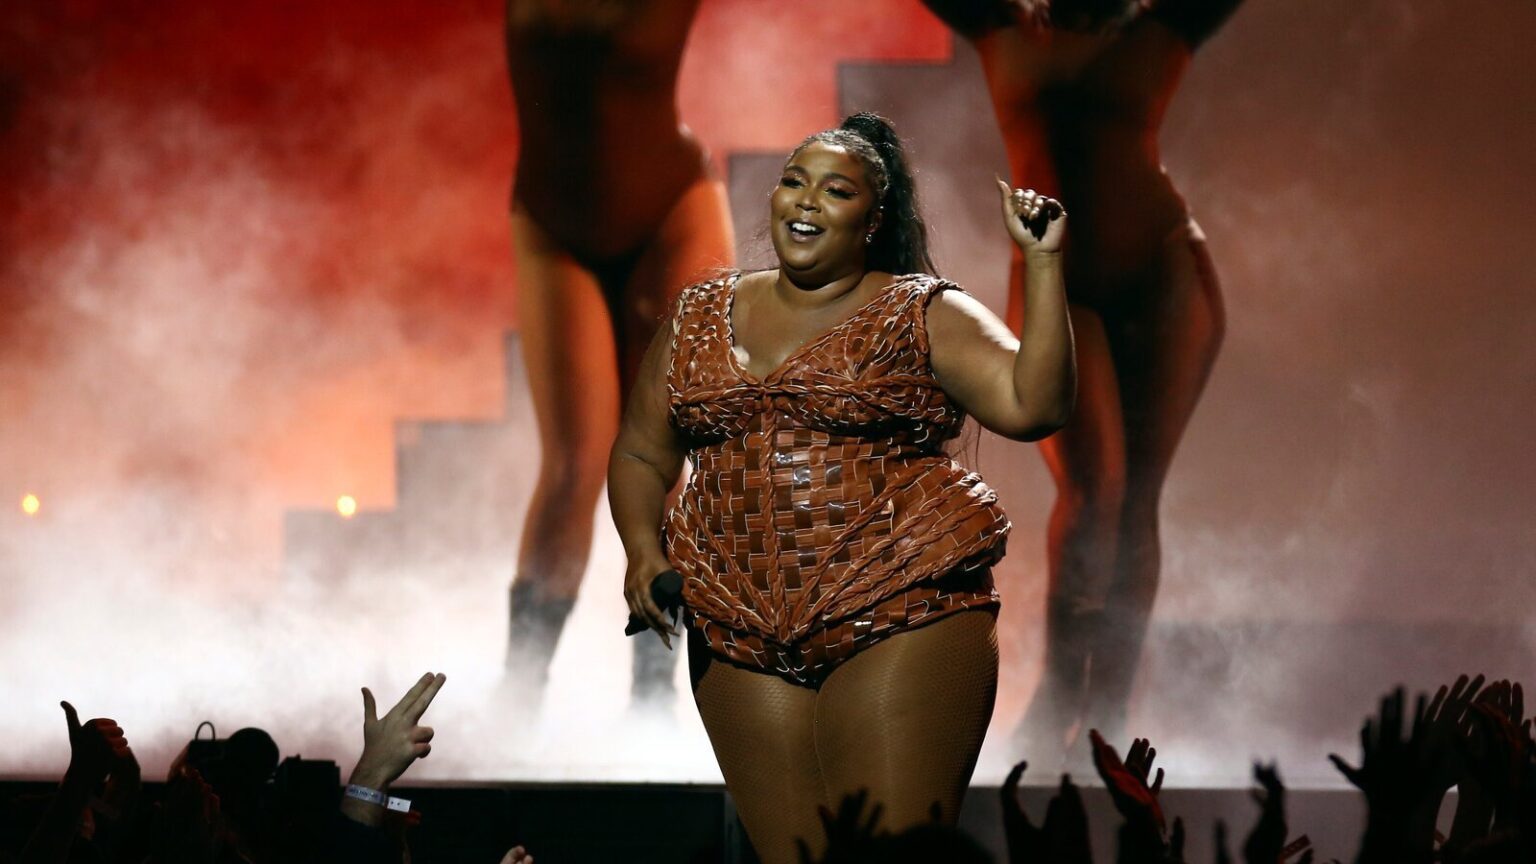 Lizzo made the decision to go on a juice cleanse for her health. Why do haters think they have a right to complain?